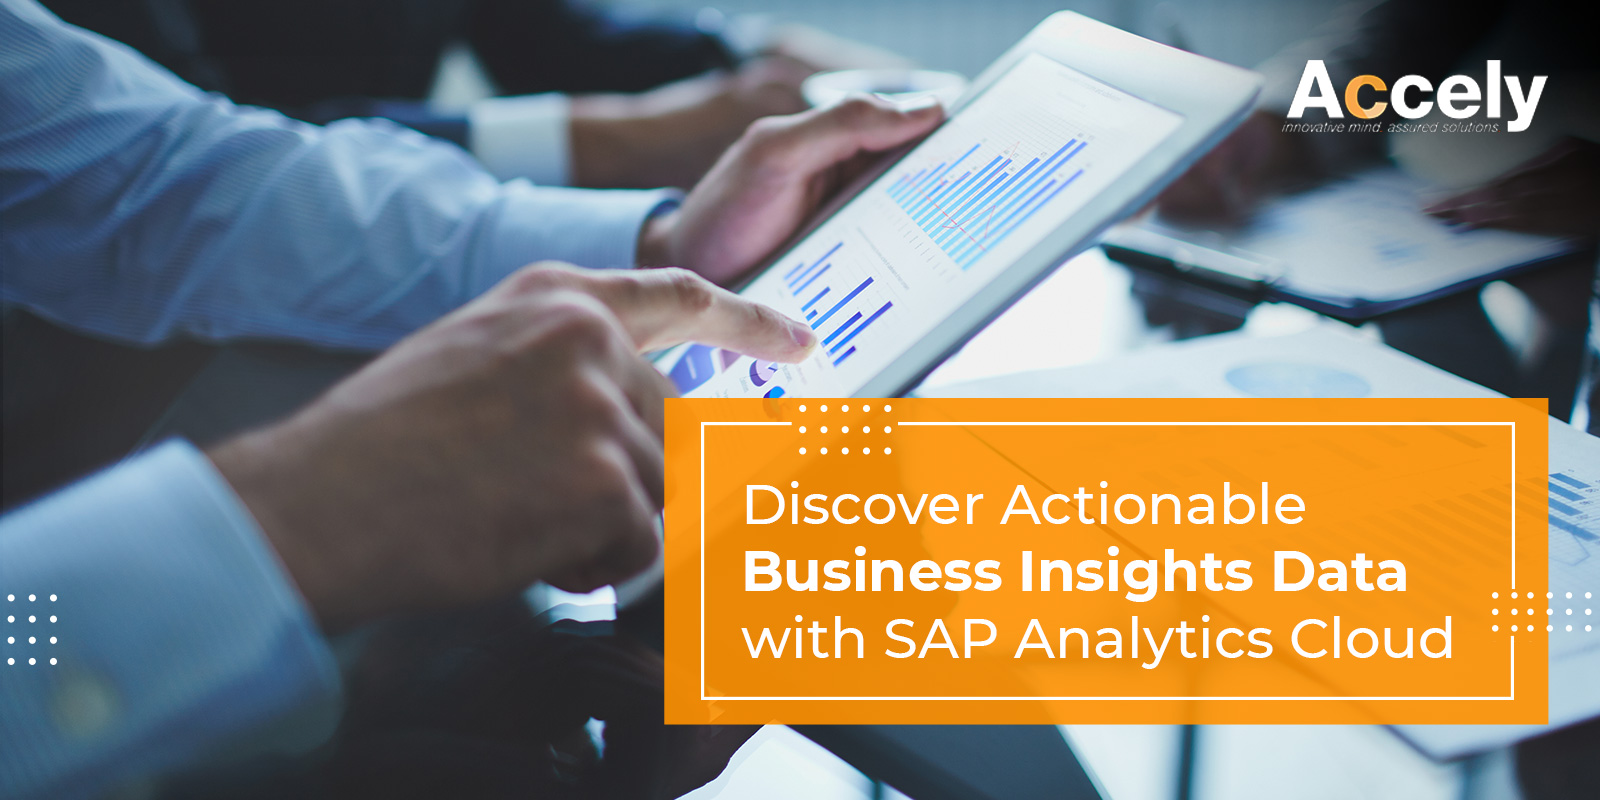 Discover Actionable Business Insights Data with SAP Analytics Cloud